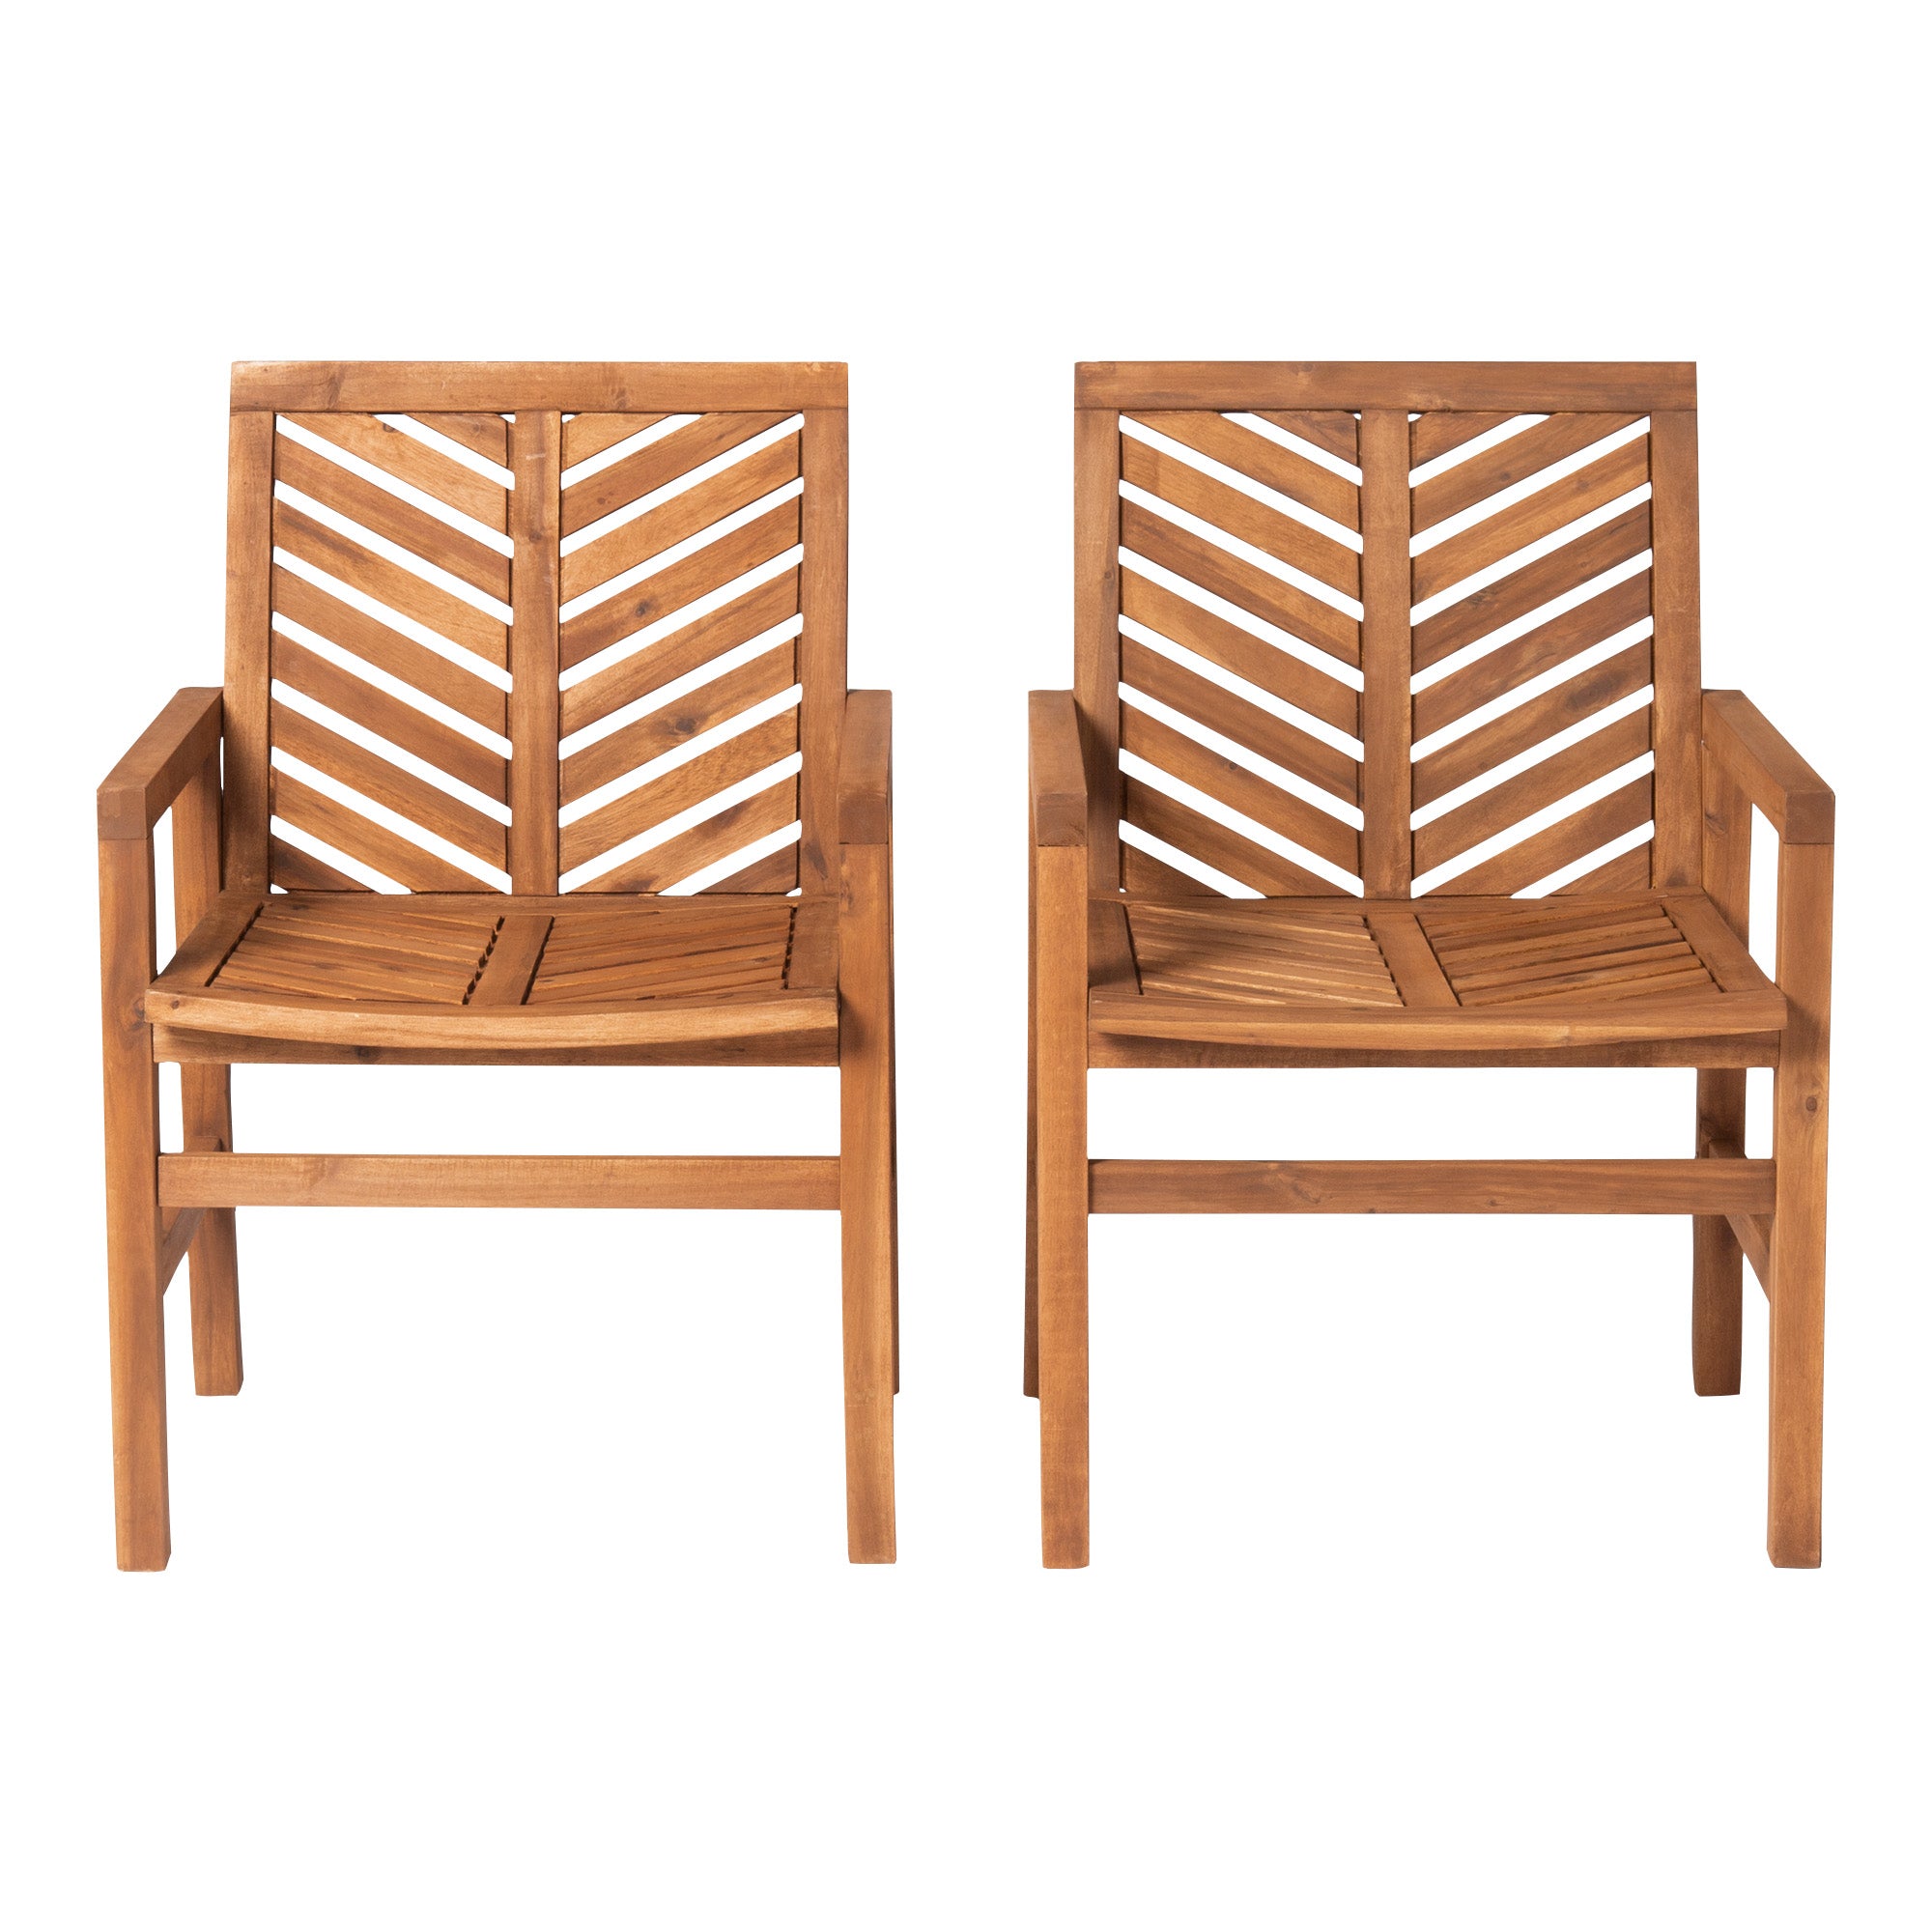 Vincent Patio Wood Chairs, Set of 2 - East Shore Modern Home Furnishings